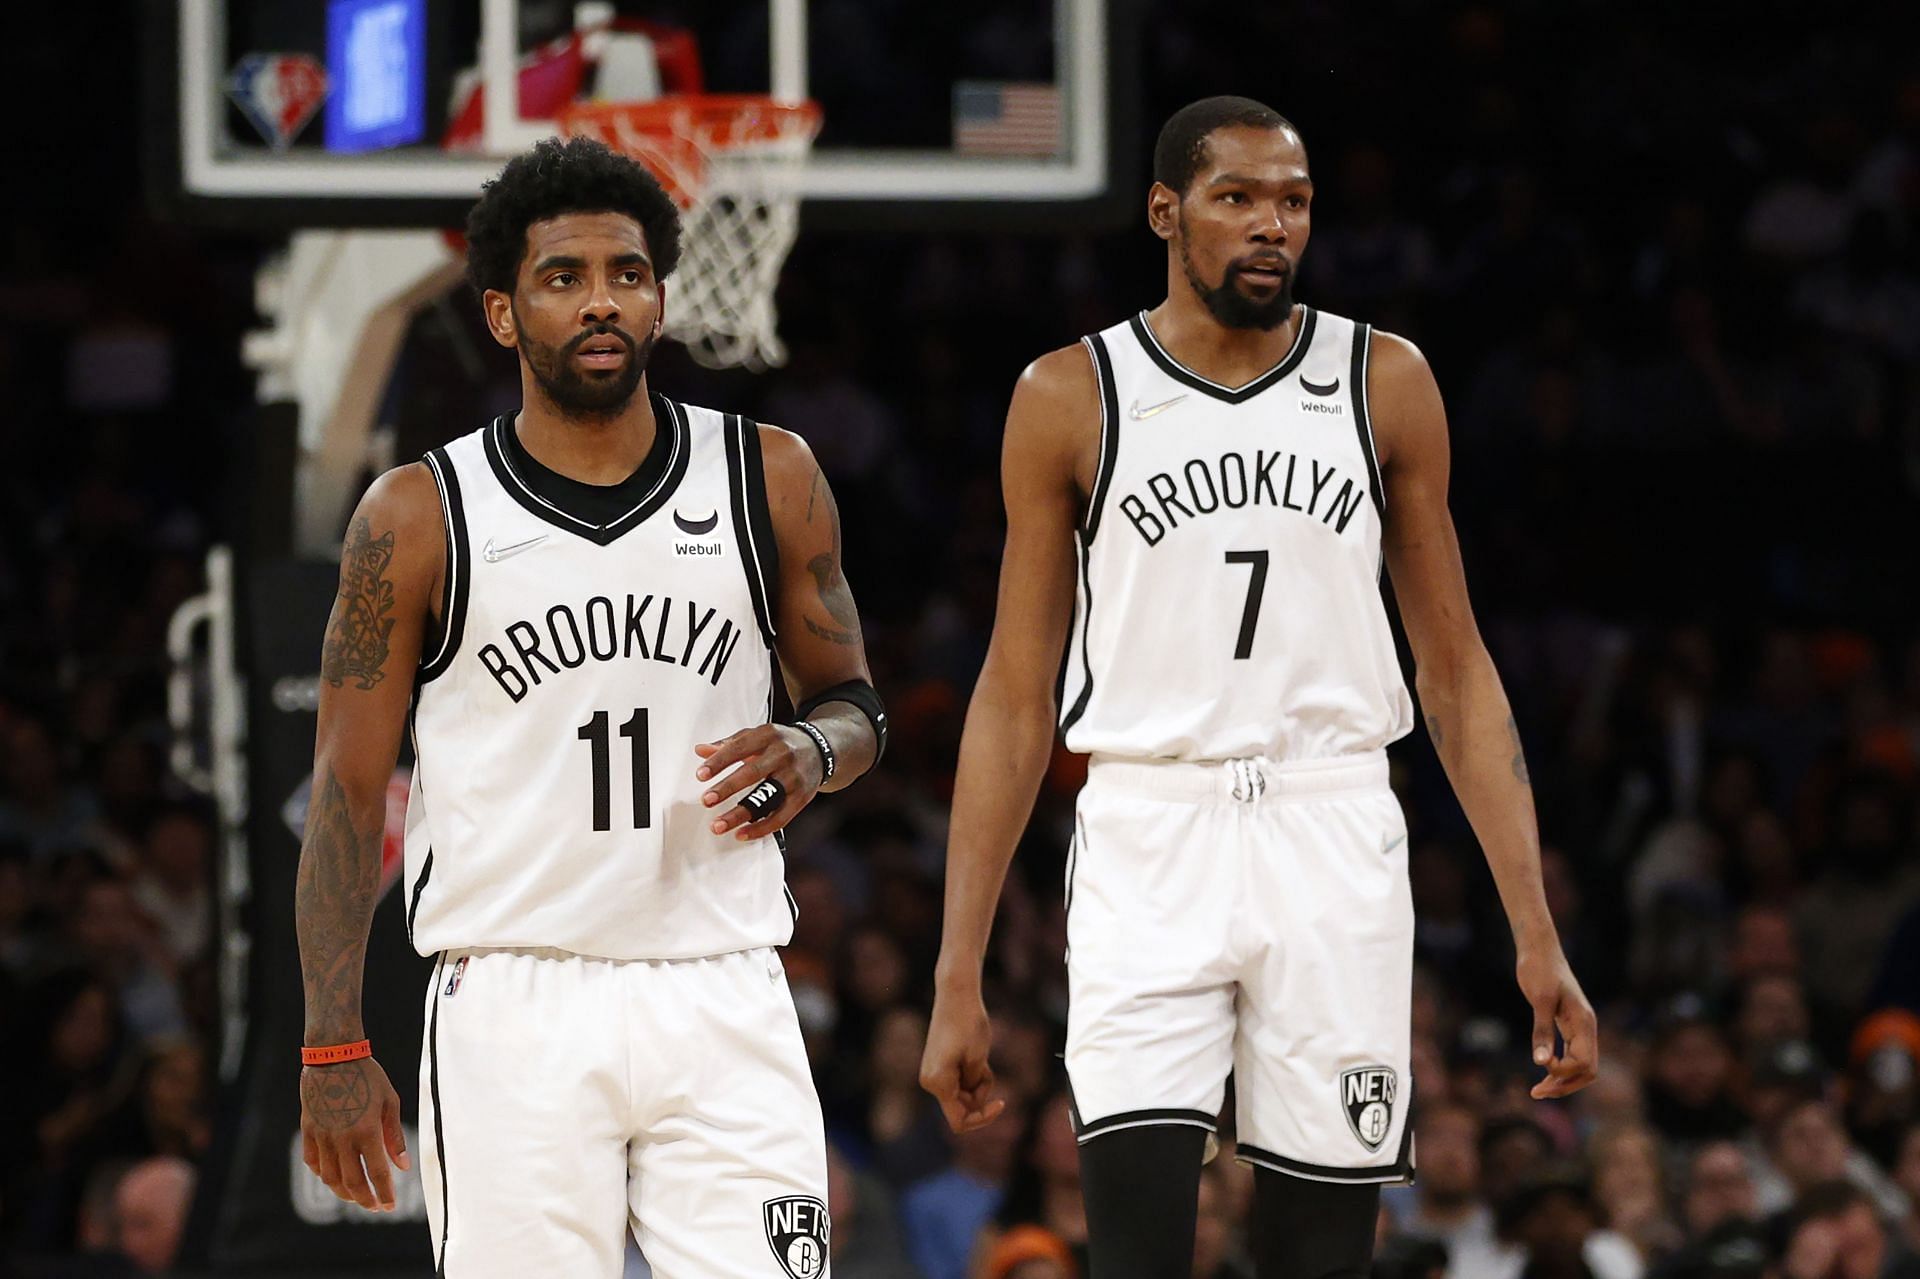 Kyrie Irving, left, and Kevin Durant of the Brooklyn Nets